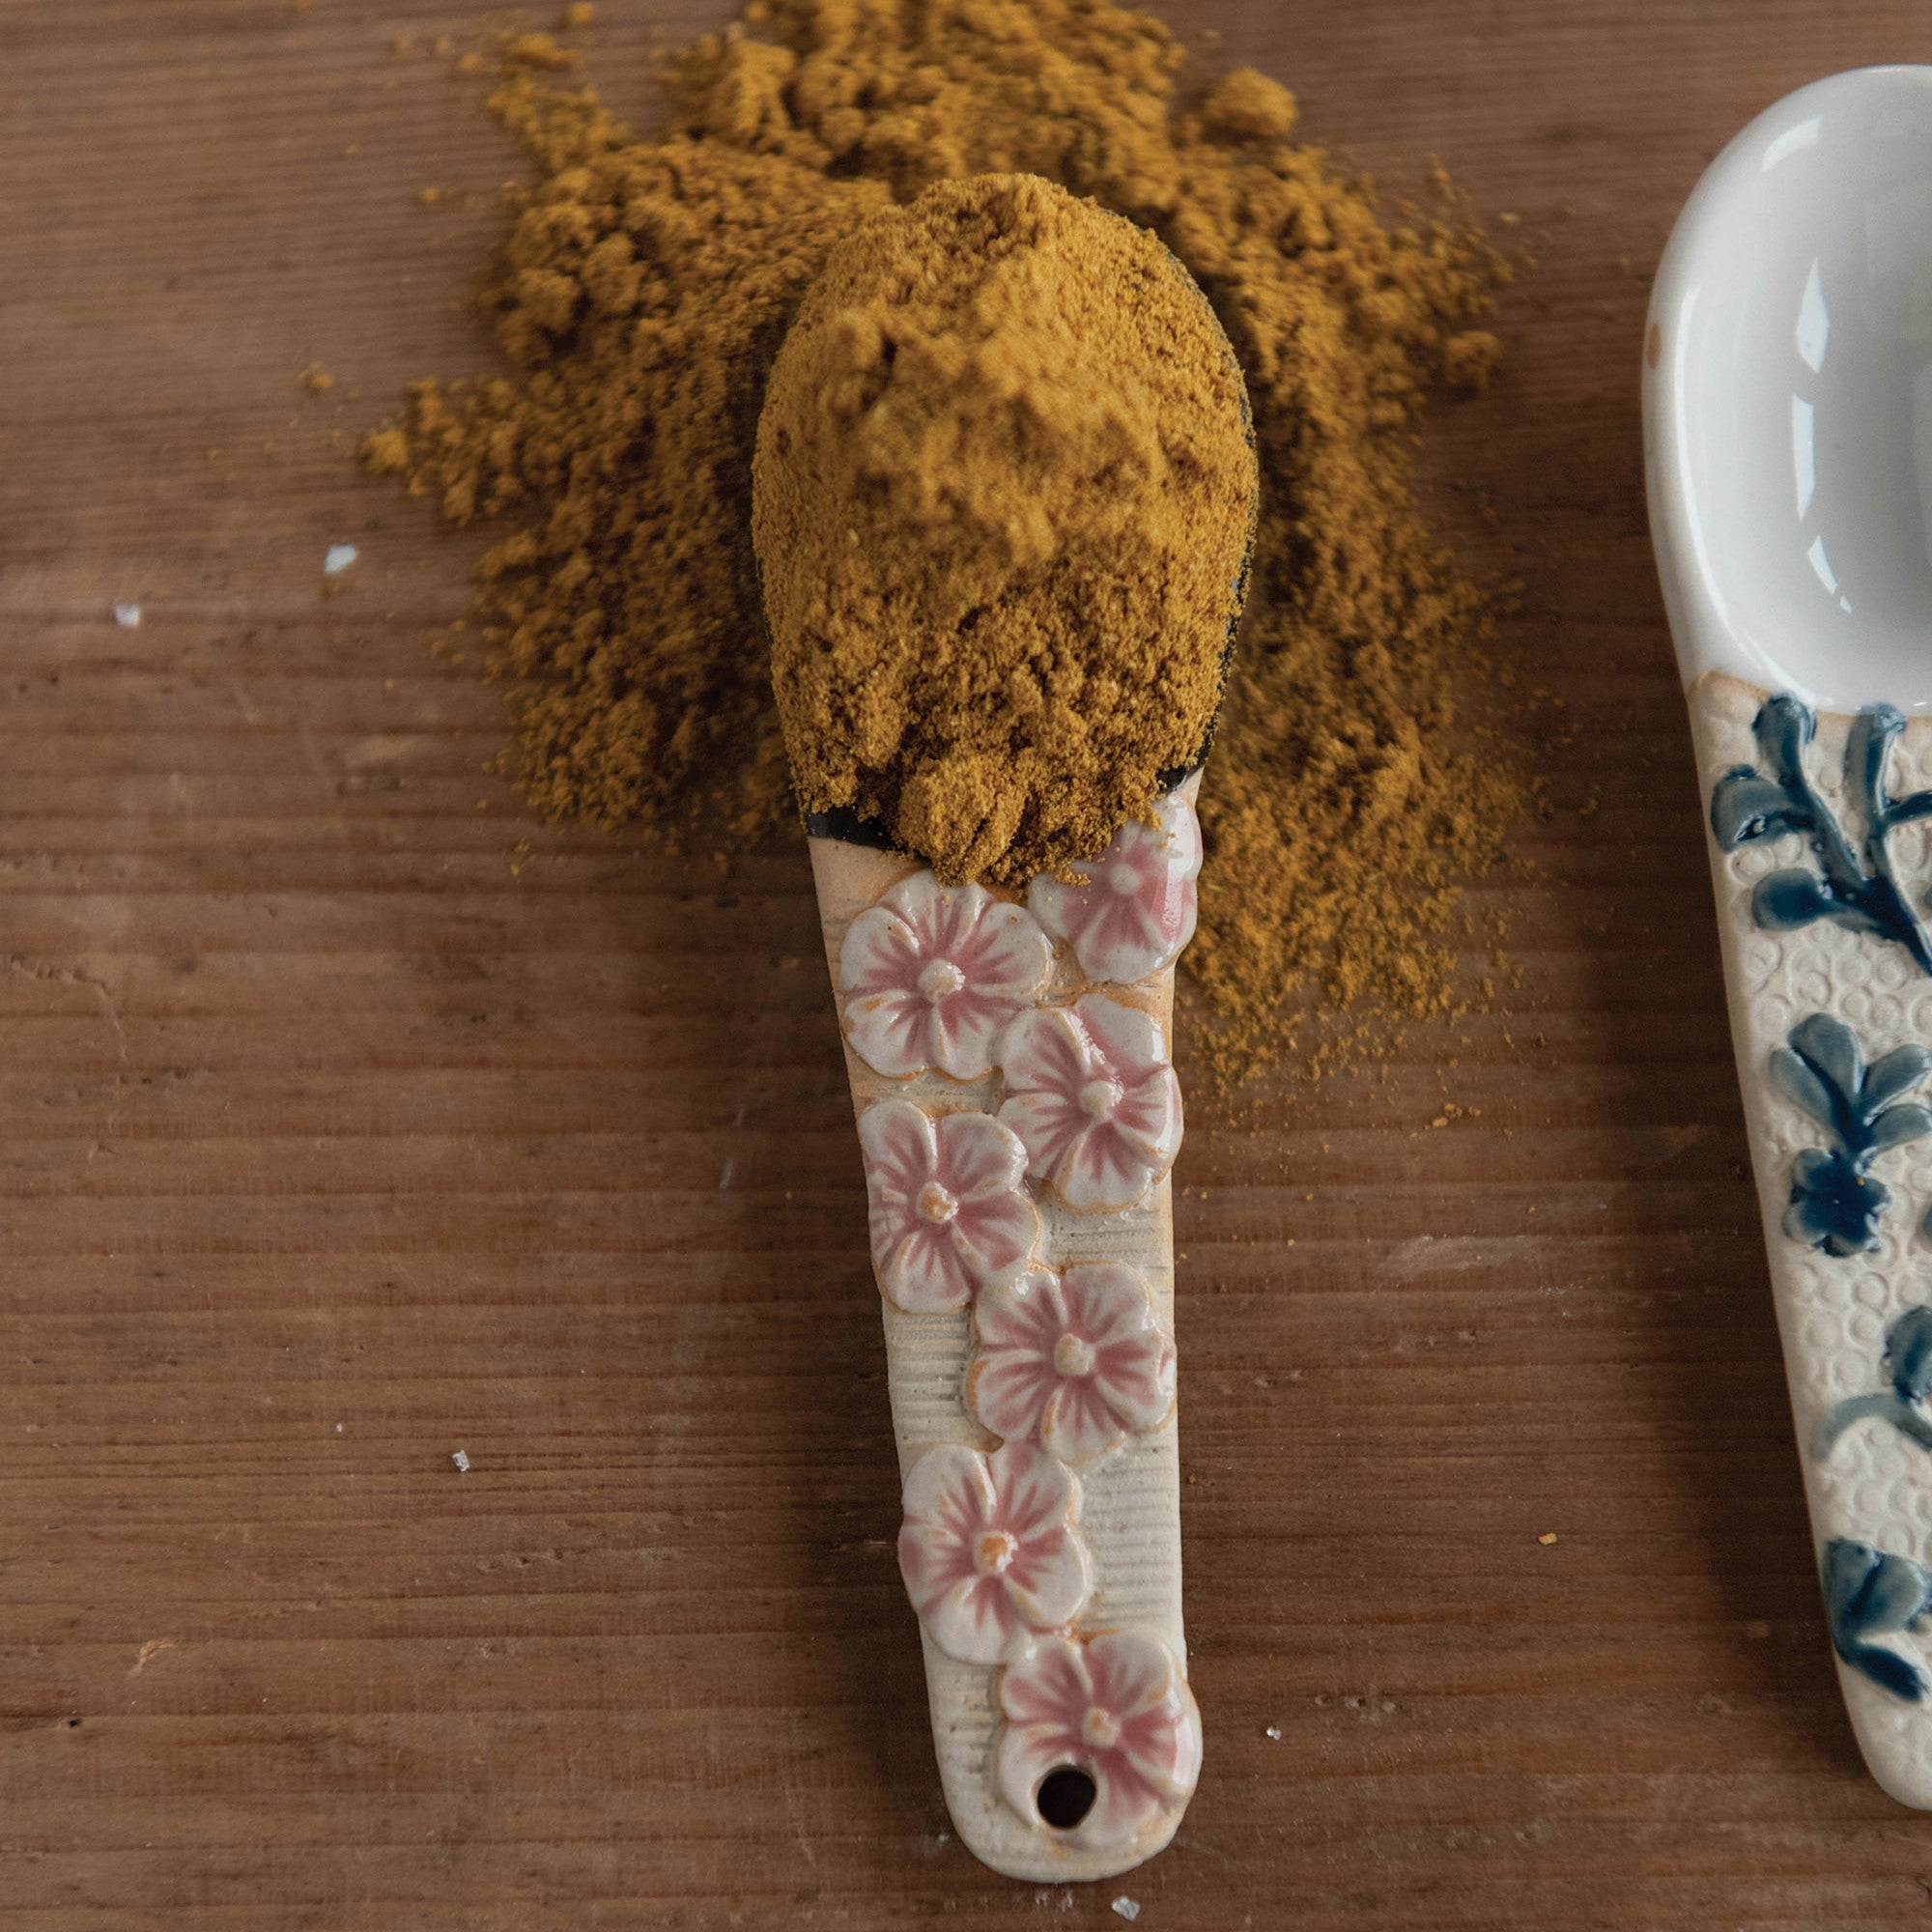 Hand-Painted Spoon